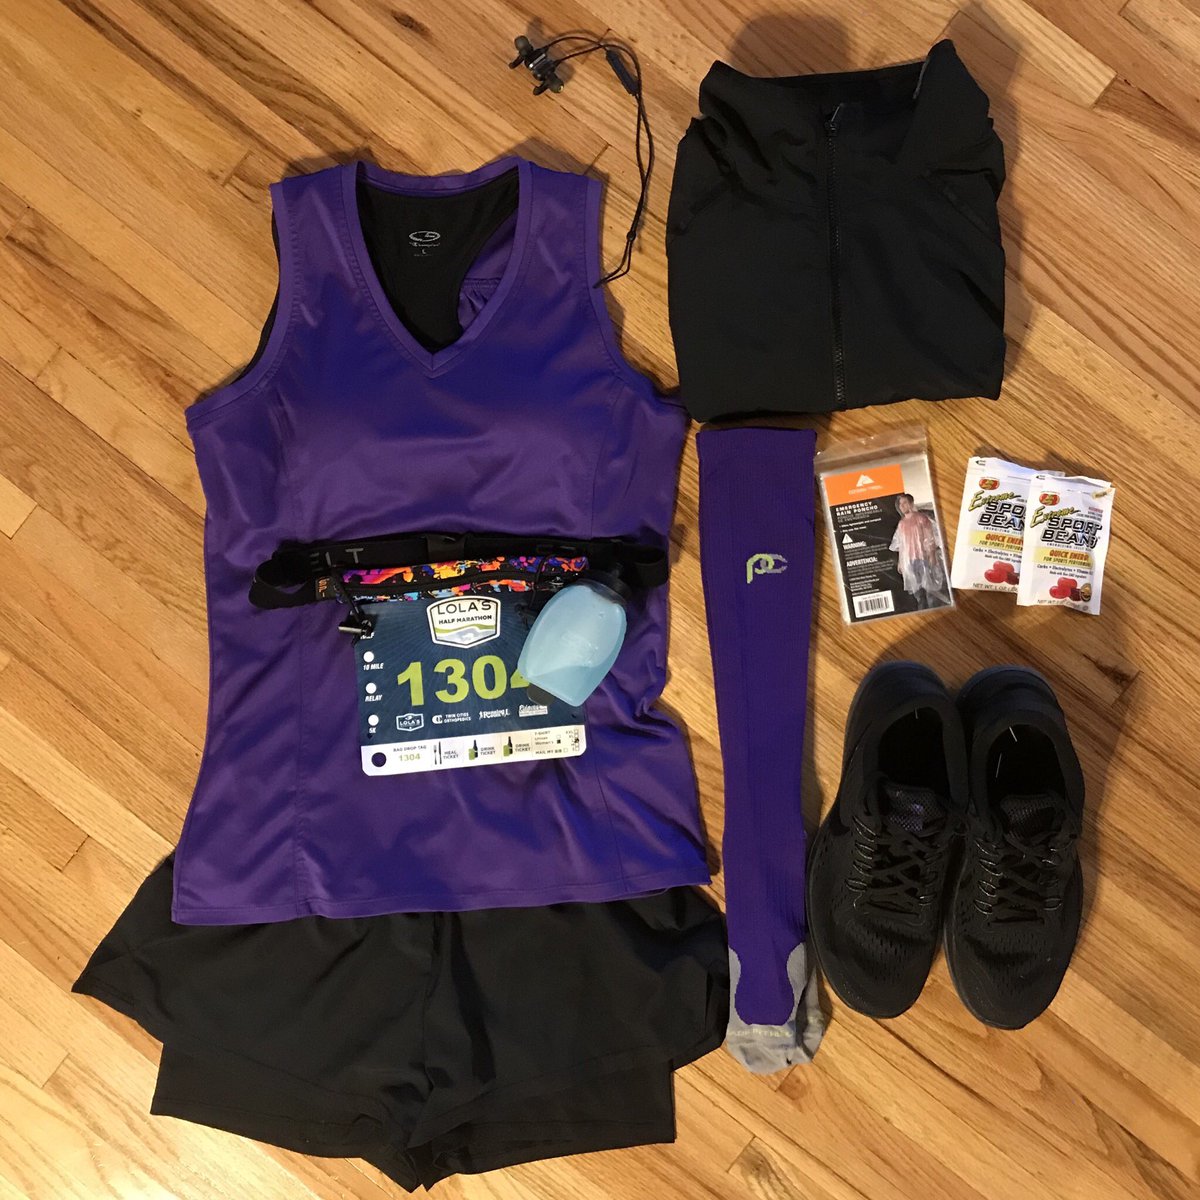 The weather looks bleak for tomorrow, but #flatchristine is ready for #mnrunseries #lolashalfmarathon Here’s hoping they don’t have to cancel! #spibelt #procompression